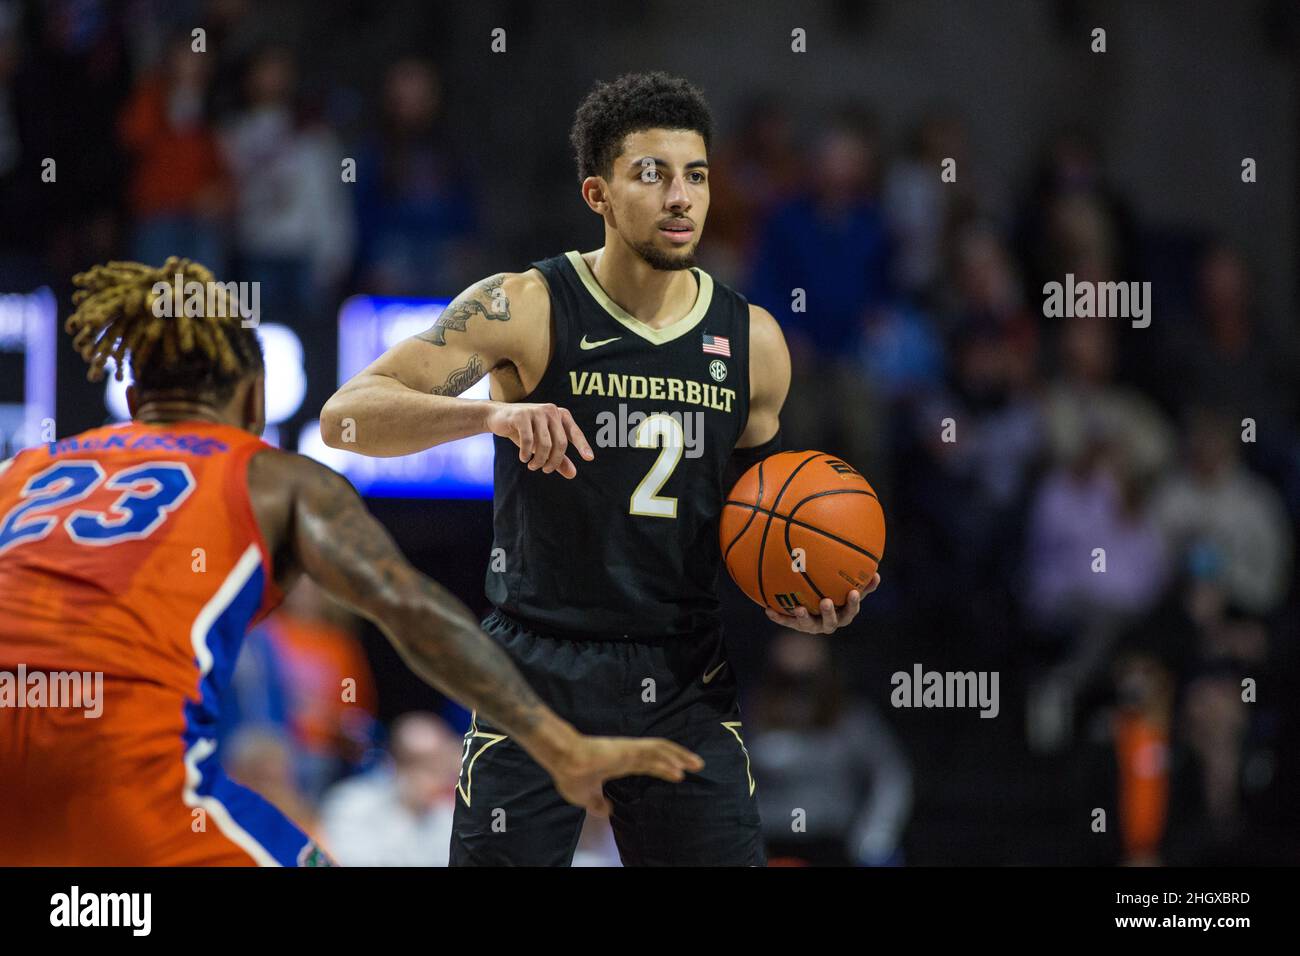 January 22, 2022: Vanderbilt Commodores guard Scotty Pippen Jr. (2) signals to a teammate during the NCAA basketball game between the Vanderbilt Commodores and the Florida Gators at Stephen C. O'Connell Center Gainesville, FL. Florida defeats Vanderbilt 61 to 42. Jonathan Huff/CSM. Stock Photo